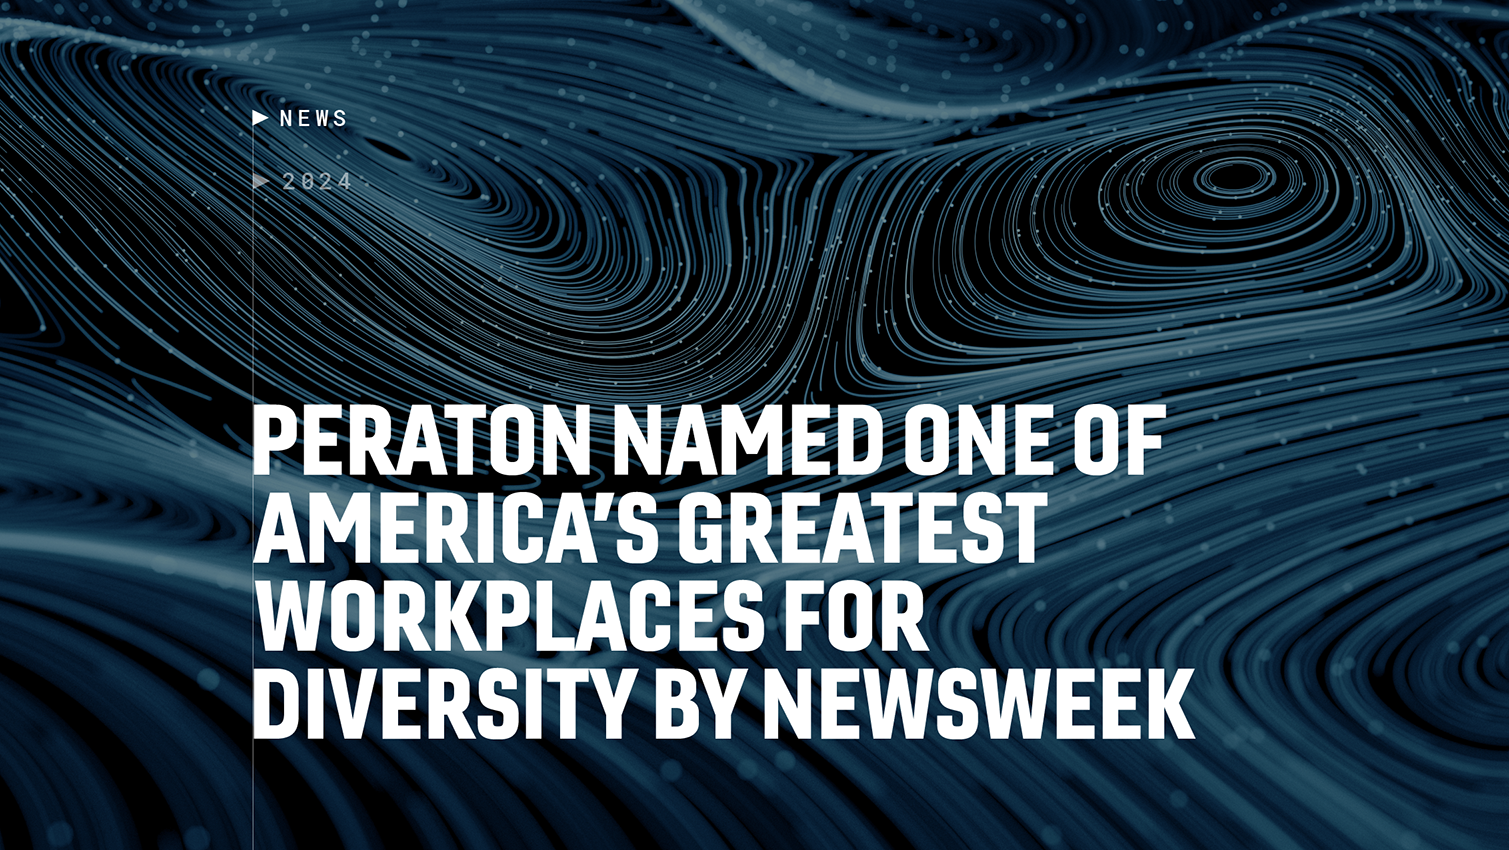 Peraton recognized as one of America’s Greatest Workplaces for